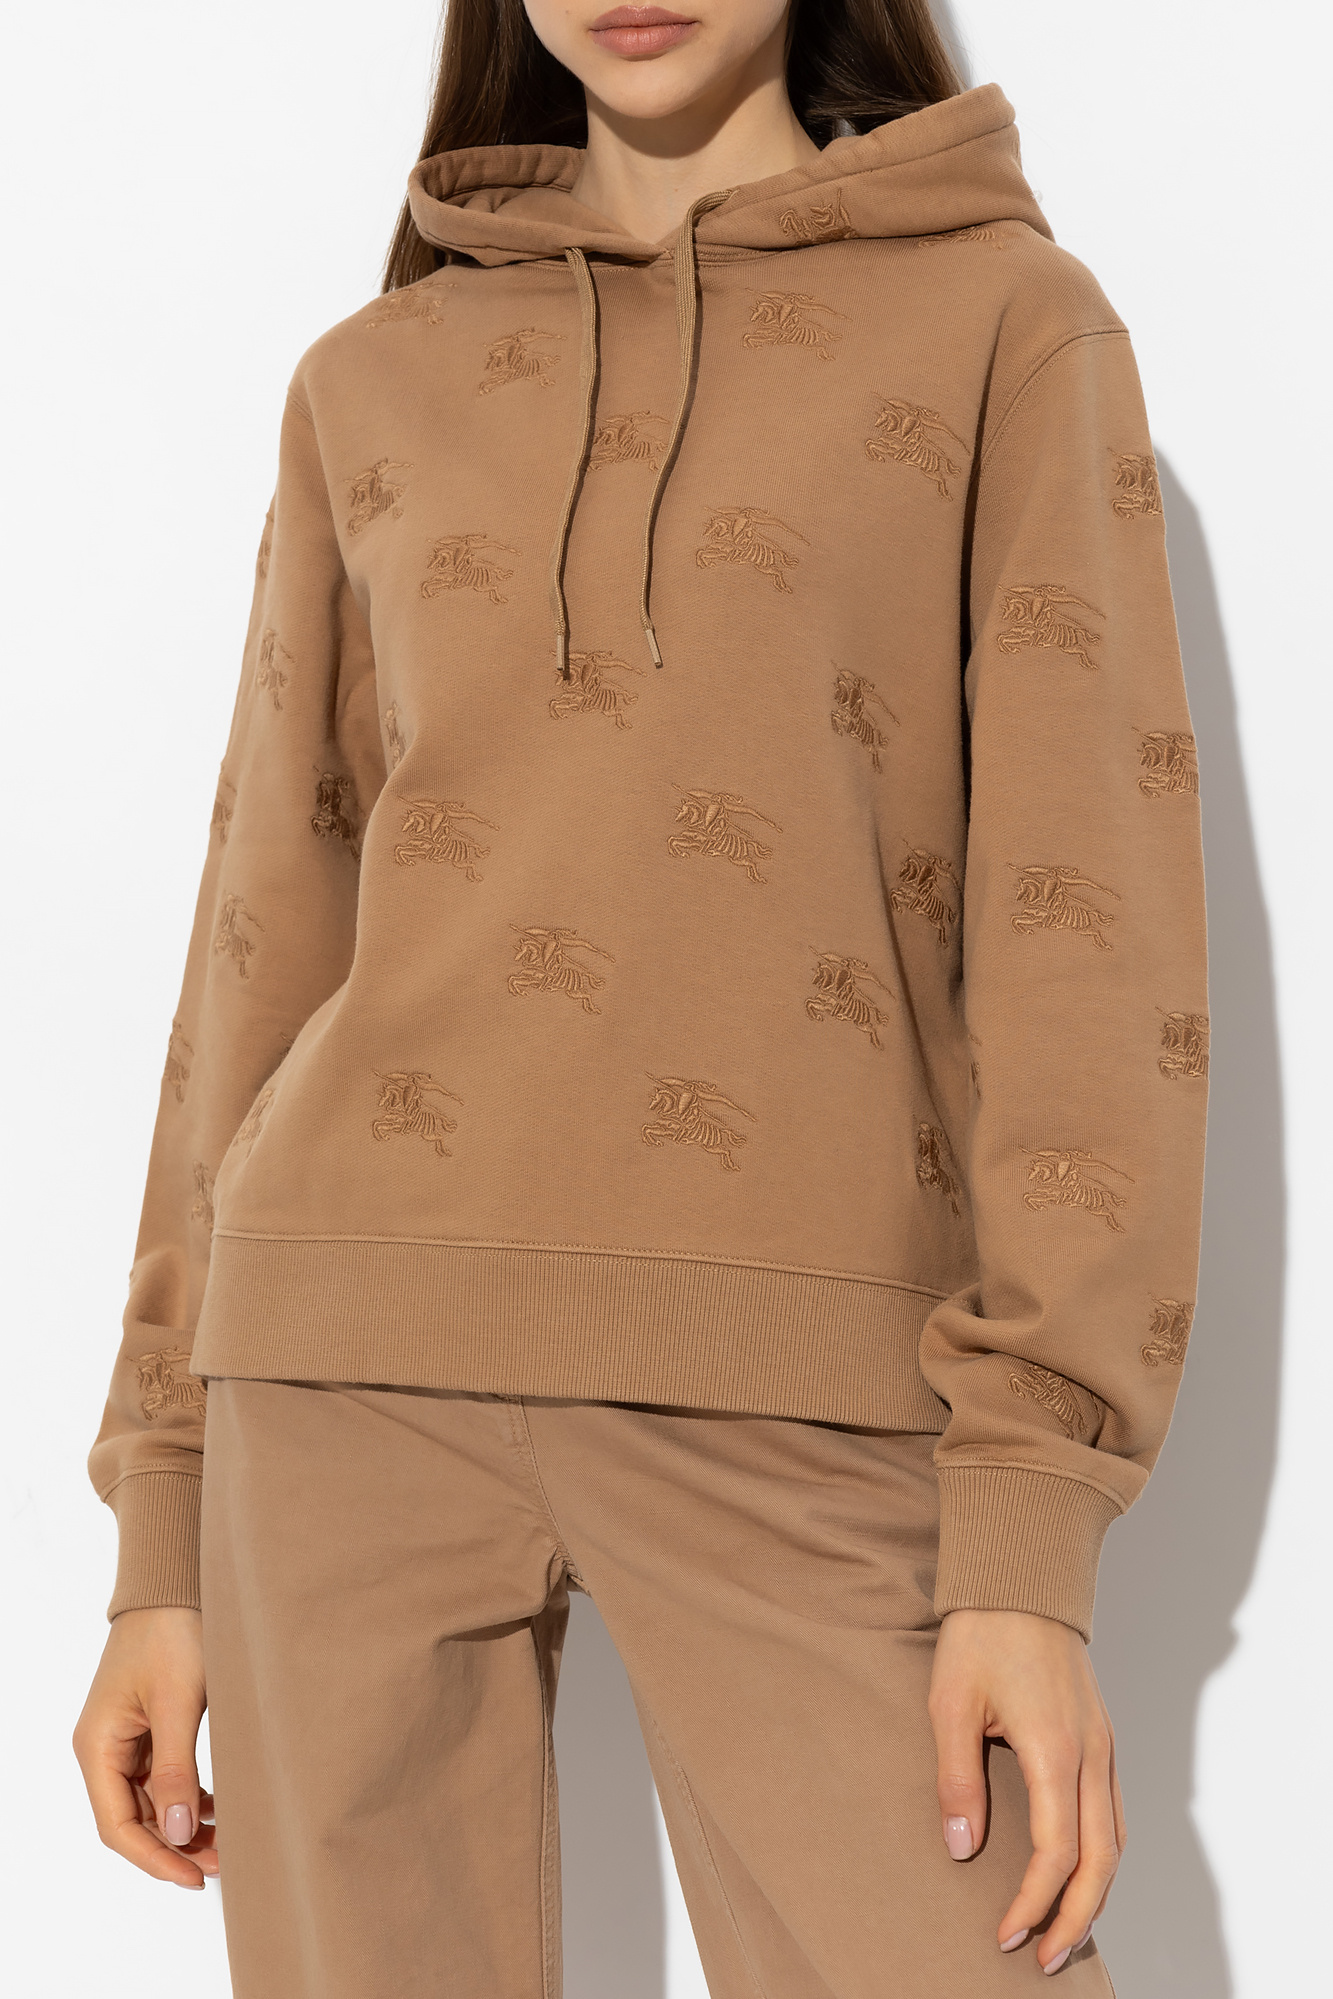 burberry CEO ‘Poulter’ hoodie